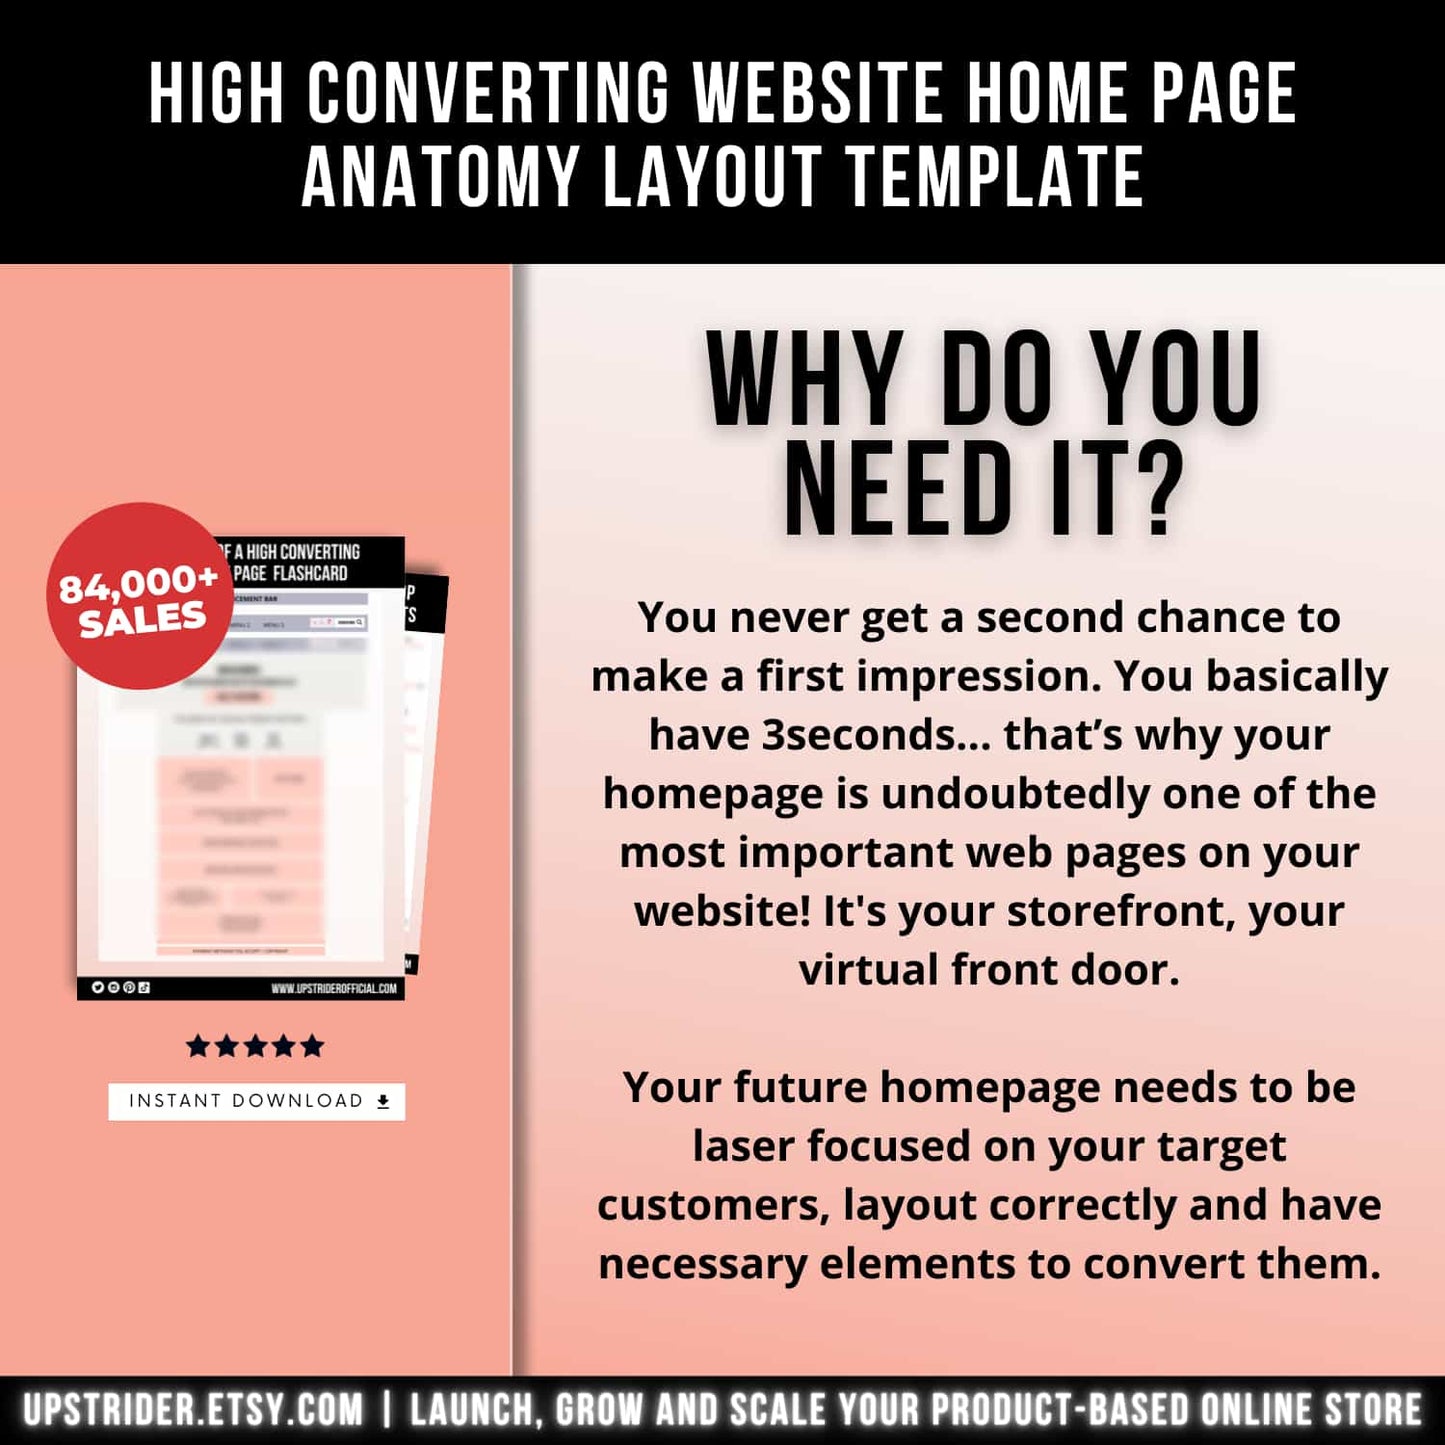 THE ANATOMY OF A HIGH CONVERTING WEBSITE HOME PAGE